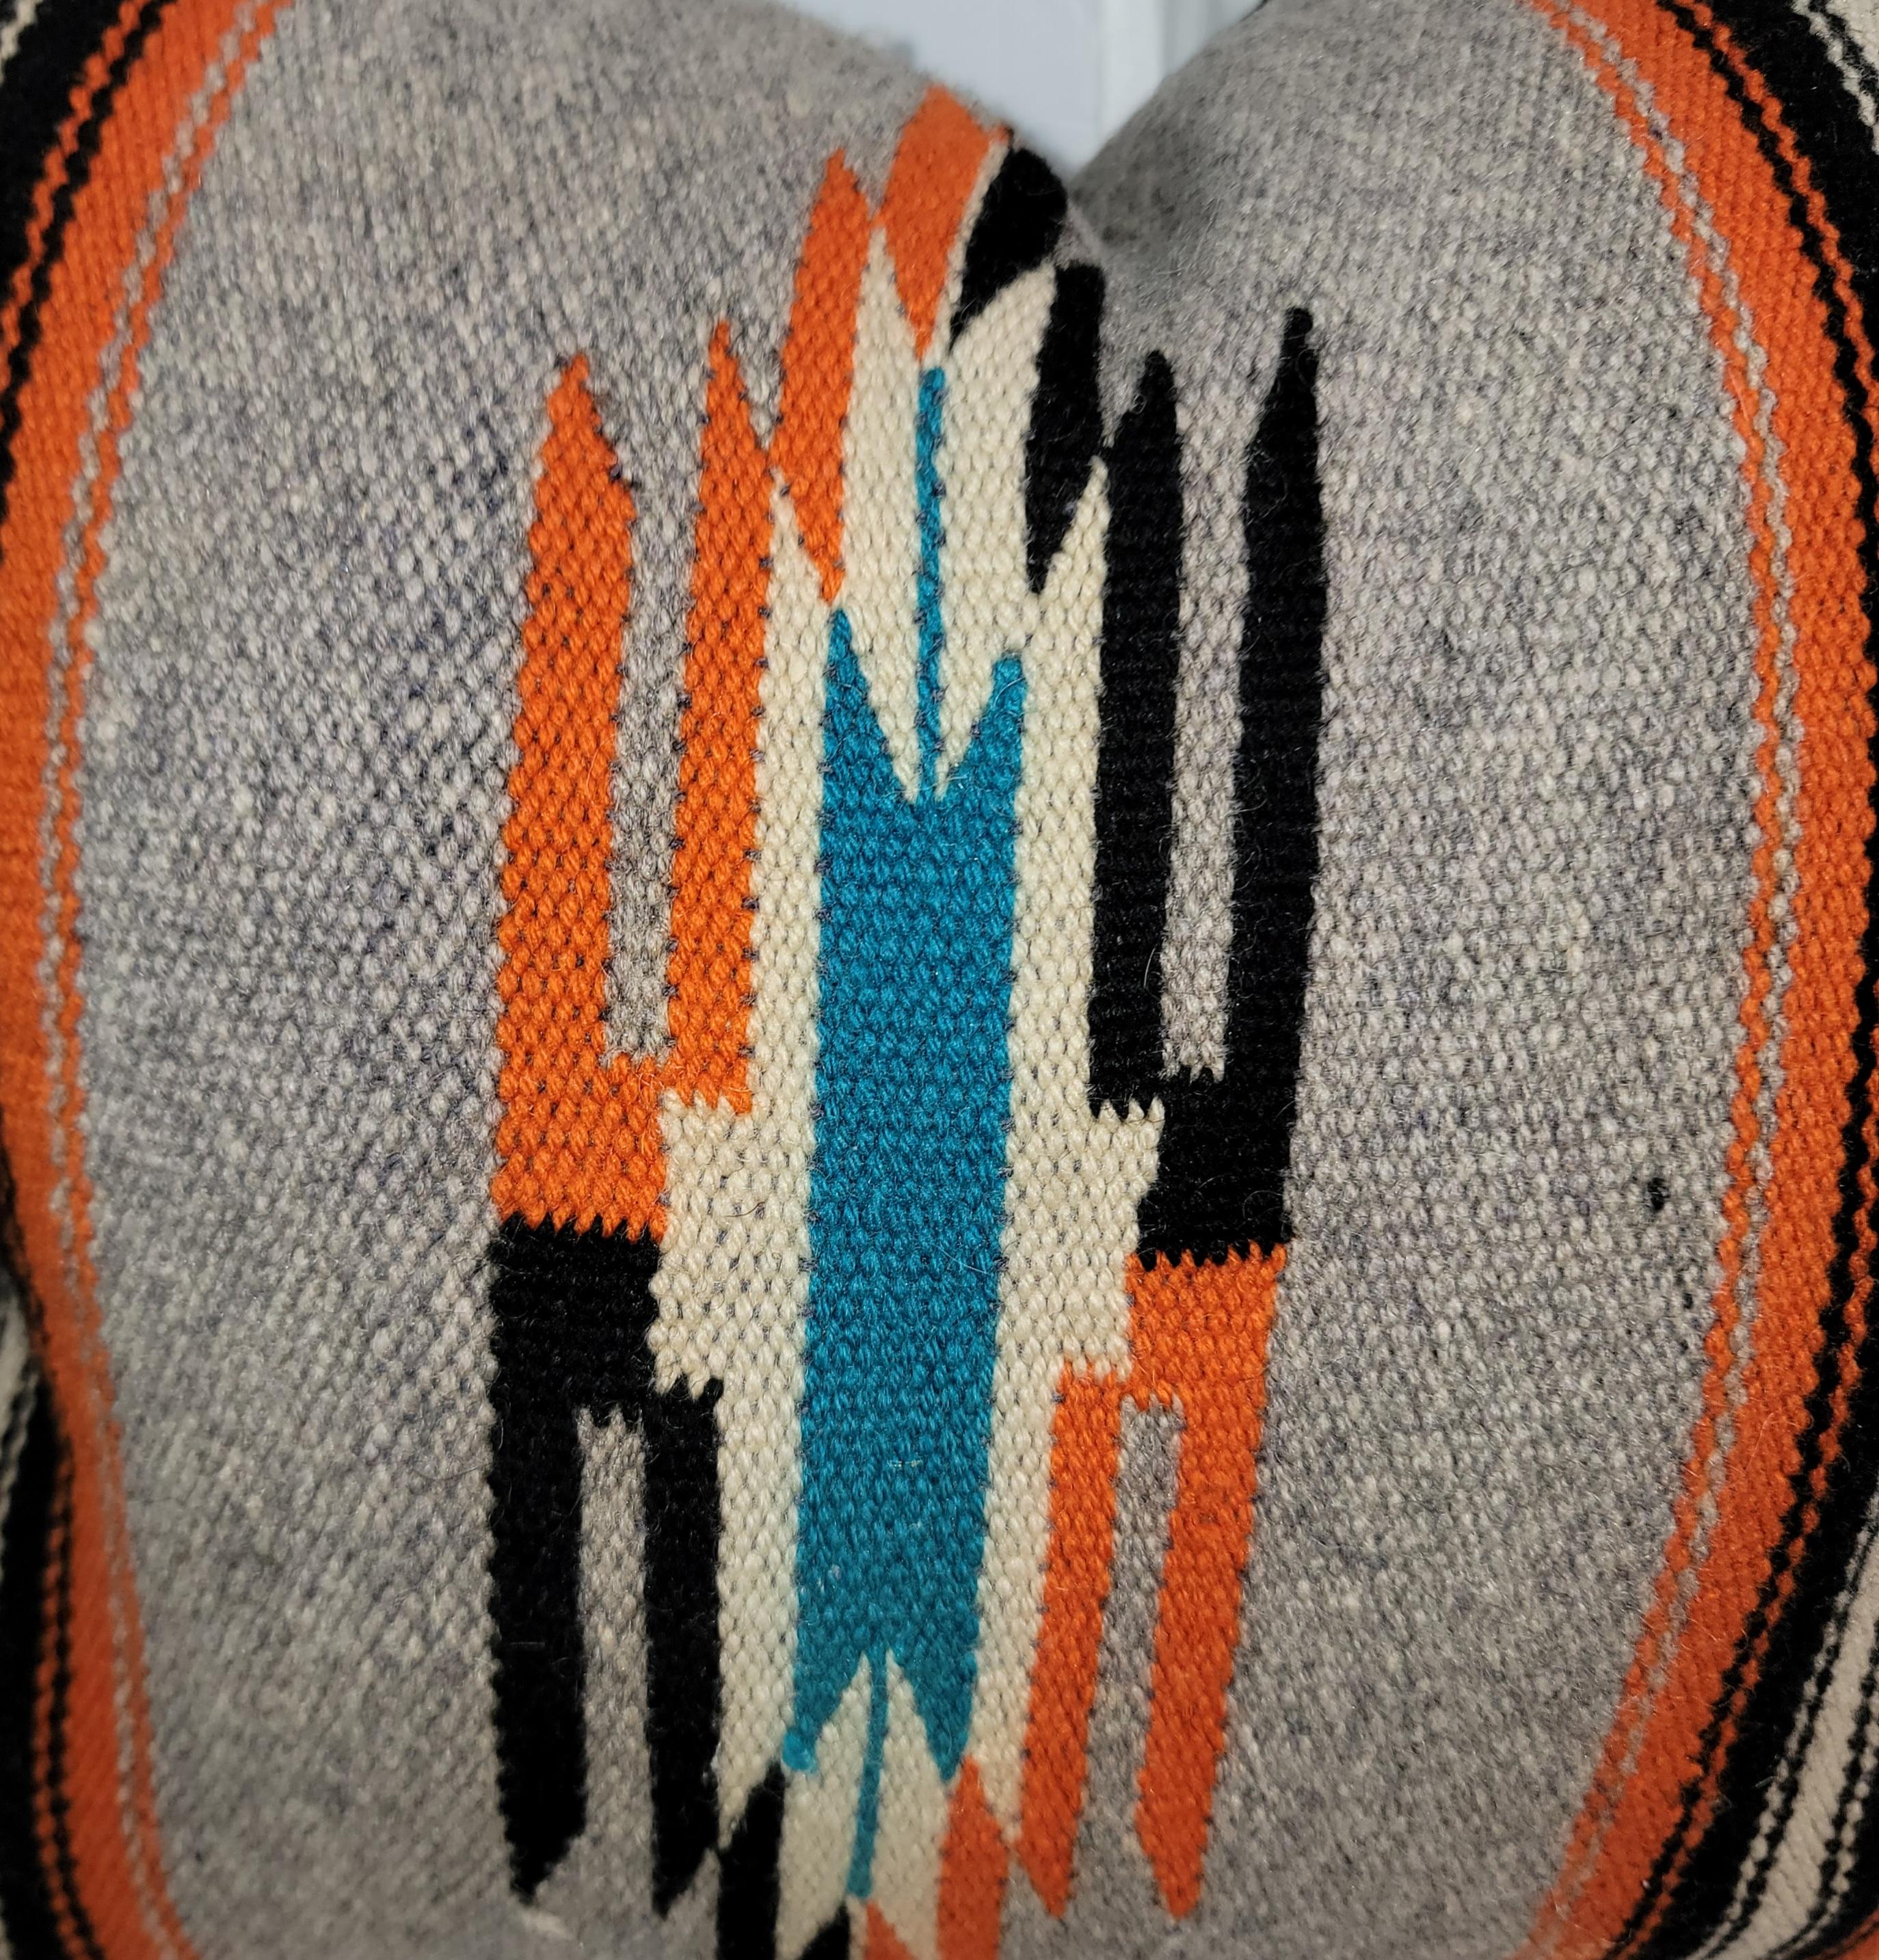 Wonderful wool serape pillow in a wonderful color pallet. Oranges and blues highlight this pillow and are a great mix to the deep colors surrounding the bright colors. has been fitted with a down and feather custom insert.